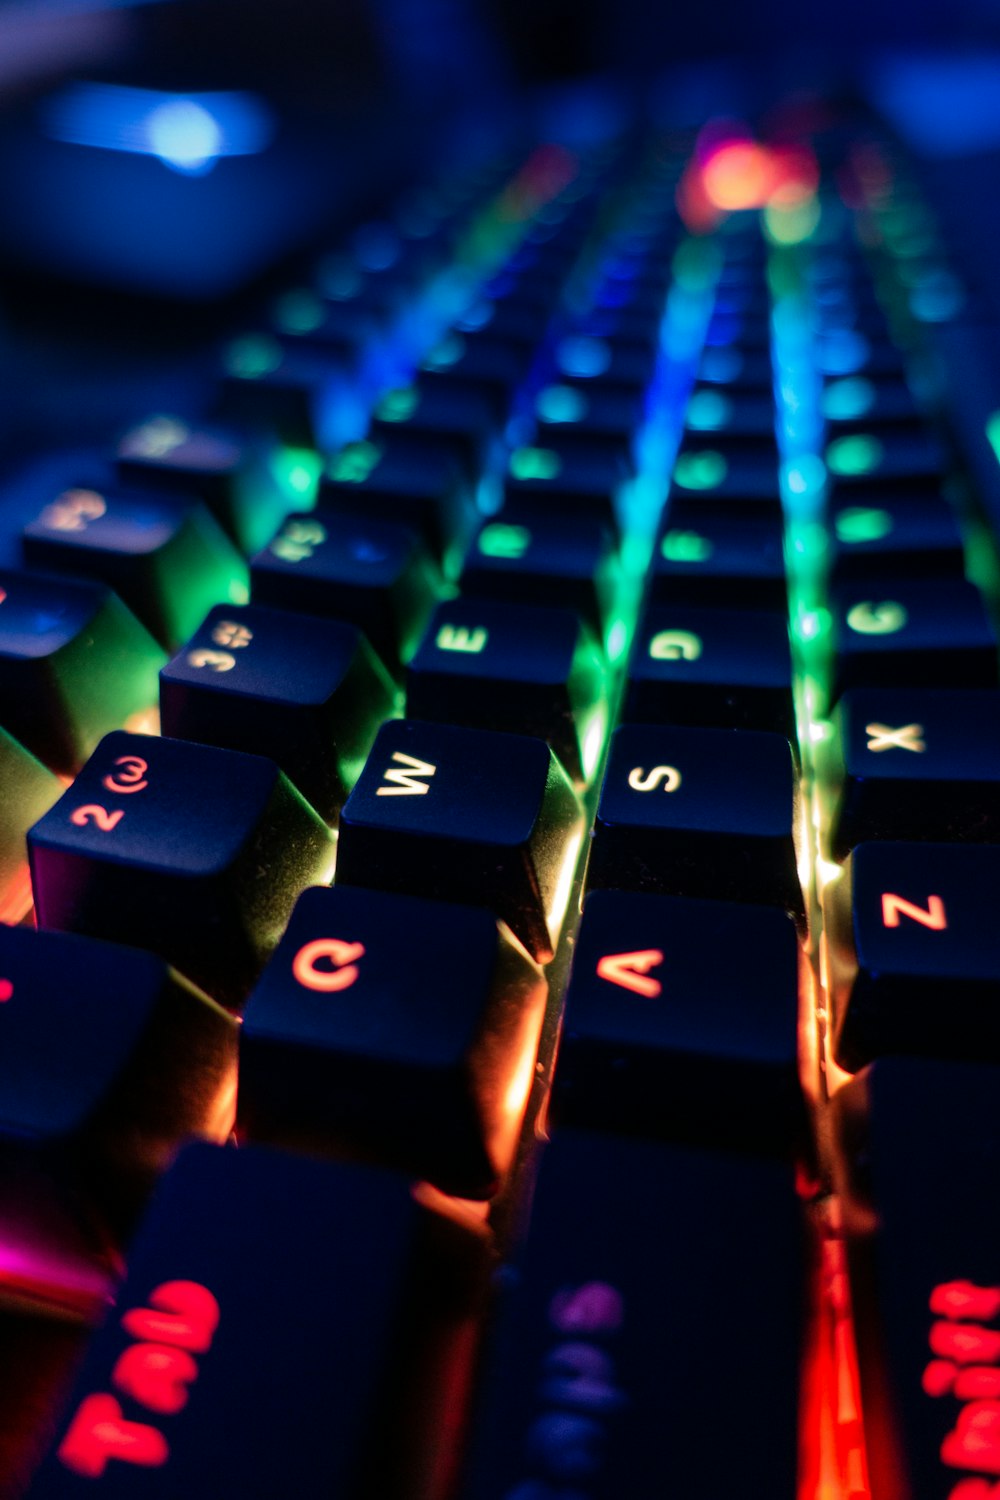 a close up of a computer keyboard with colorful keys